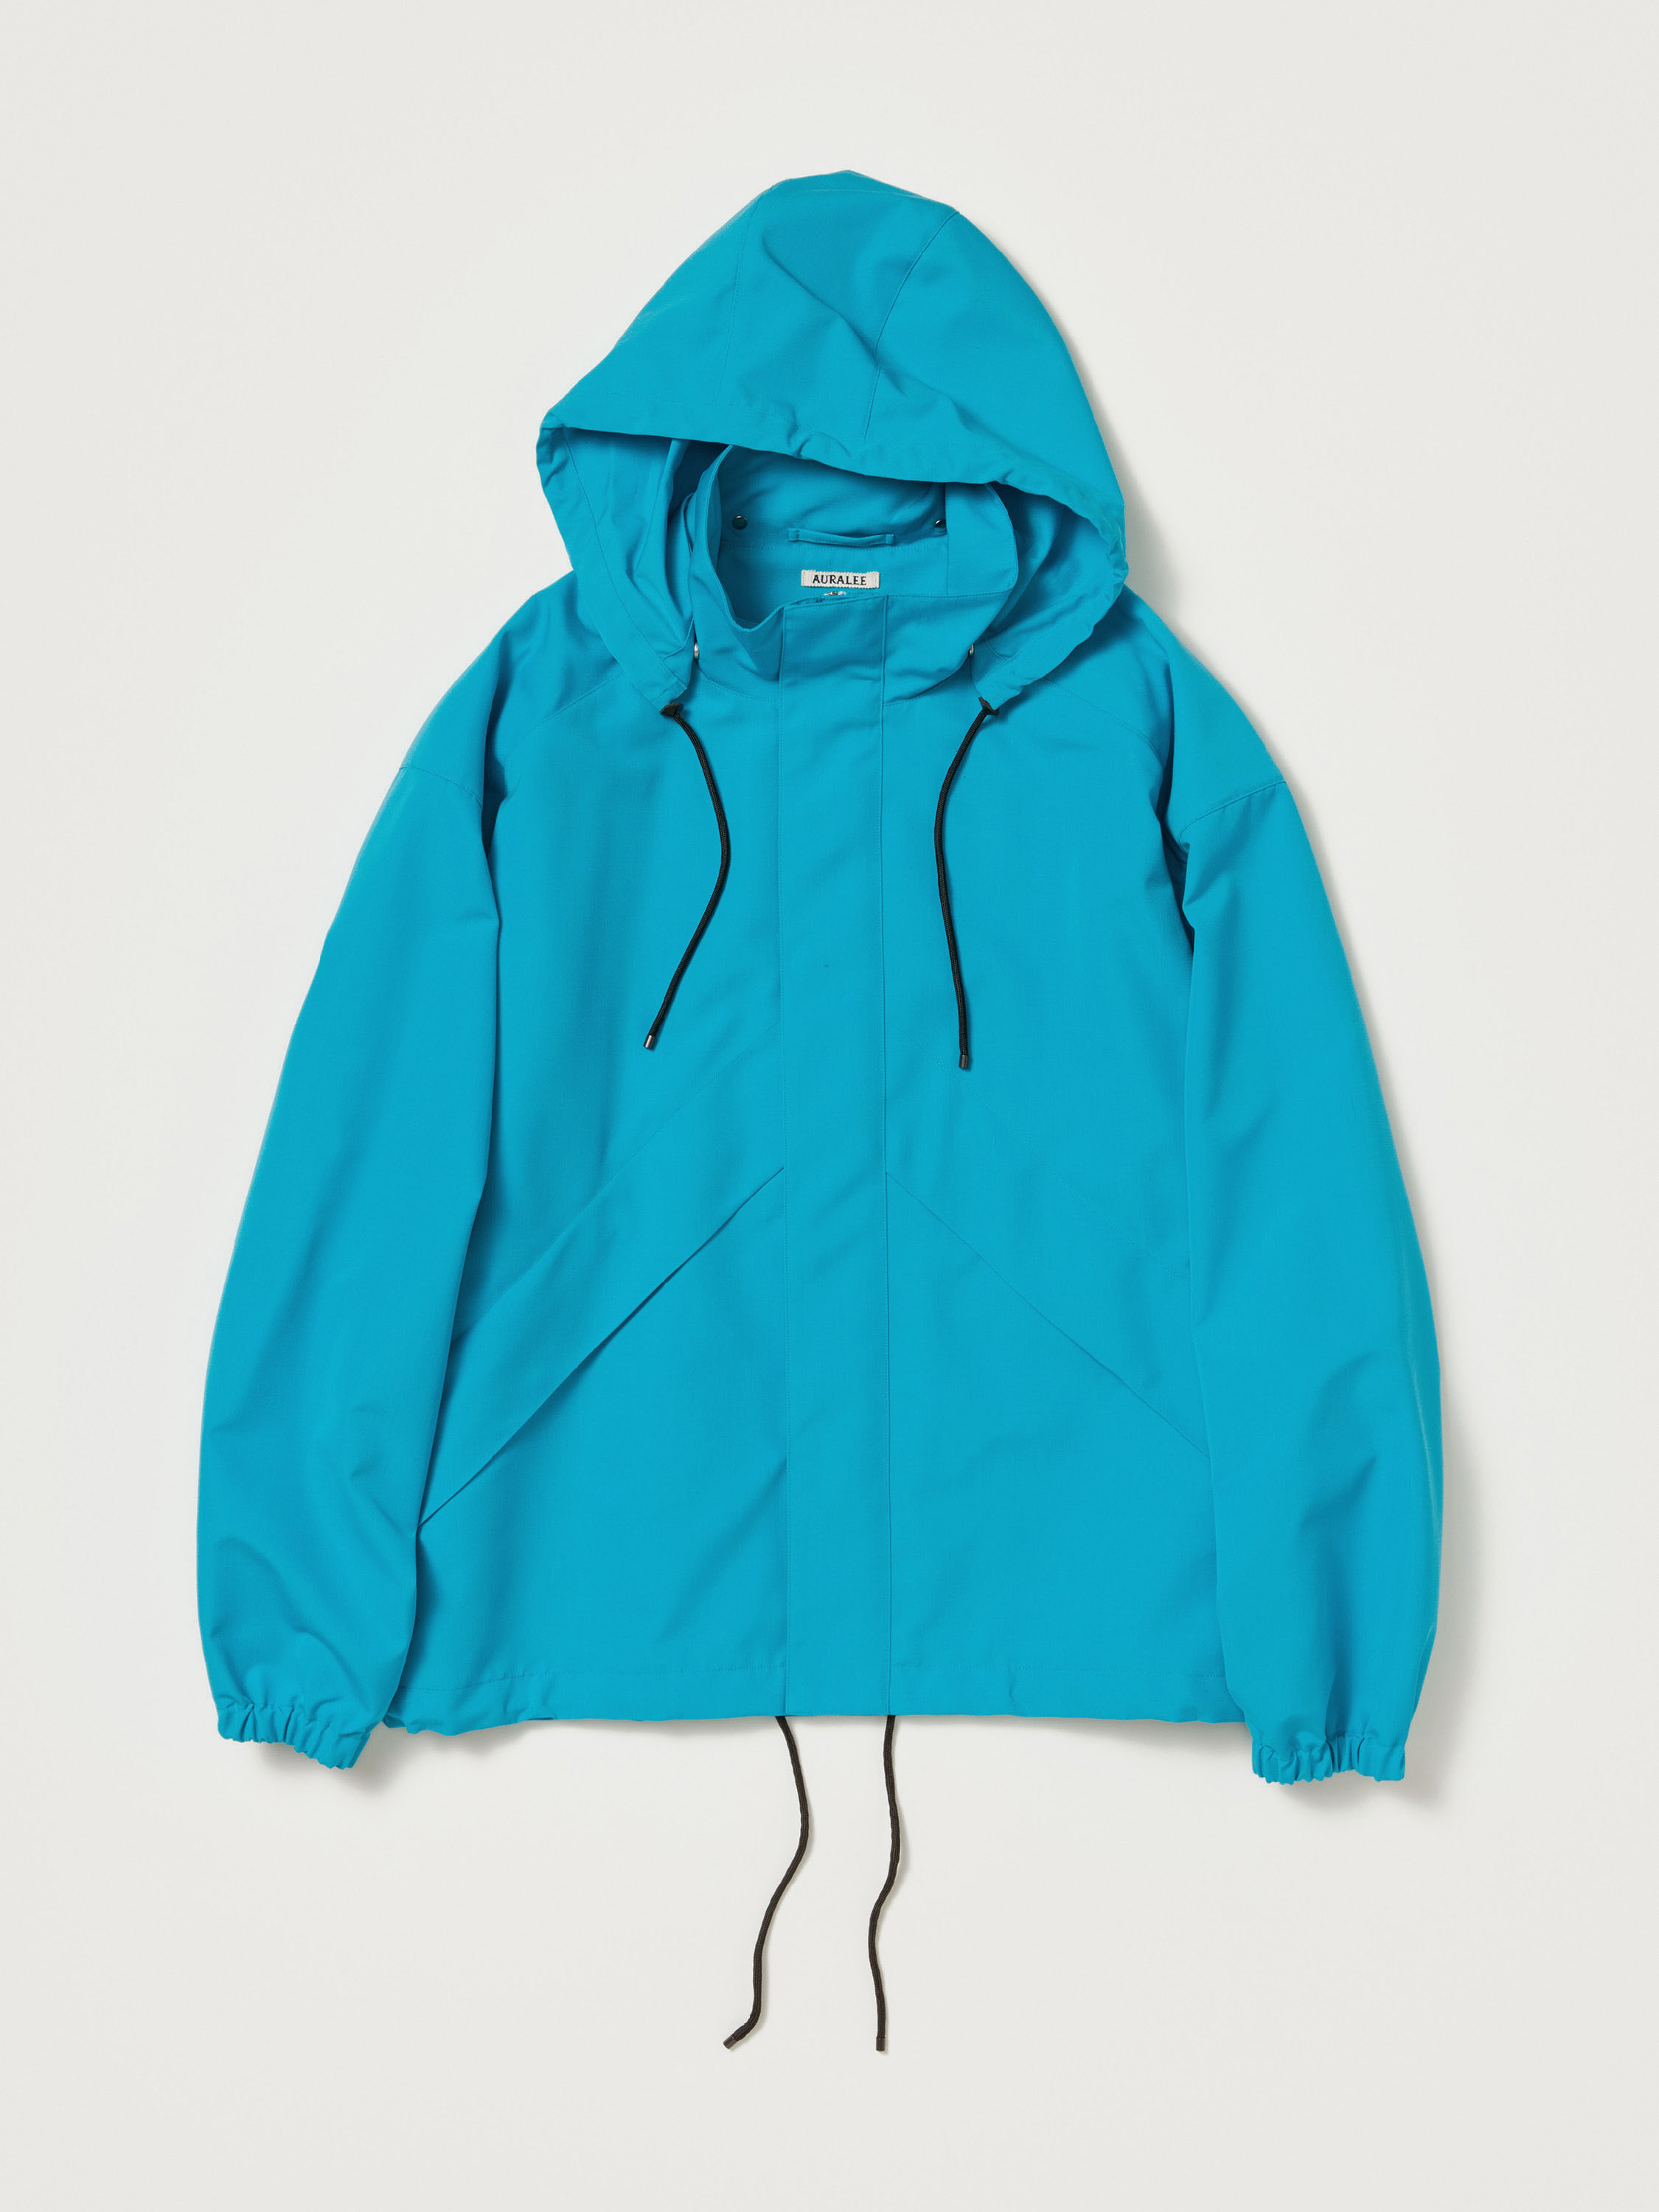 WOOL MAX CANVAS HOODED BLOUSON 詳細画像 TURQUOISE BLUE 4